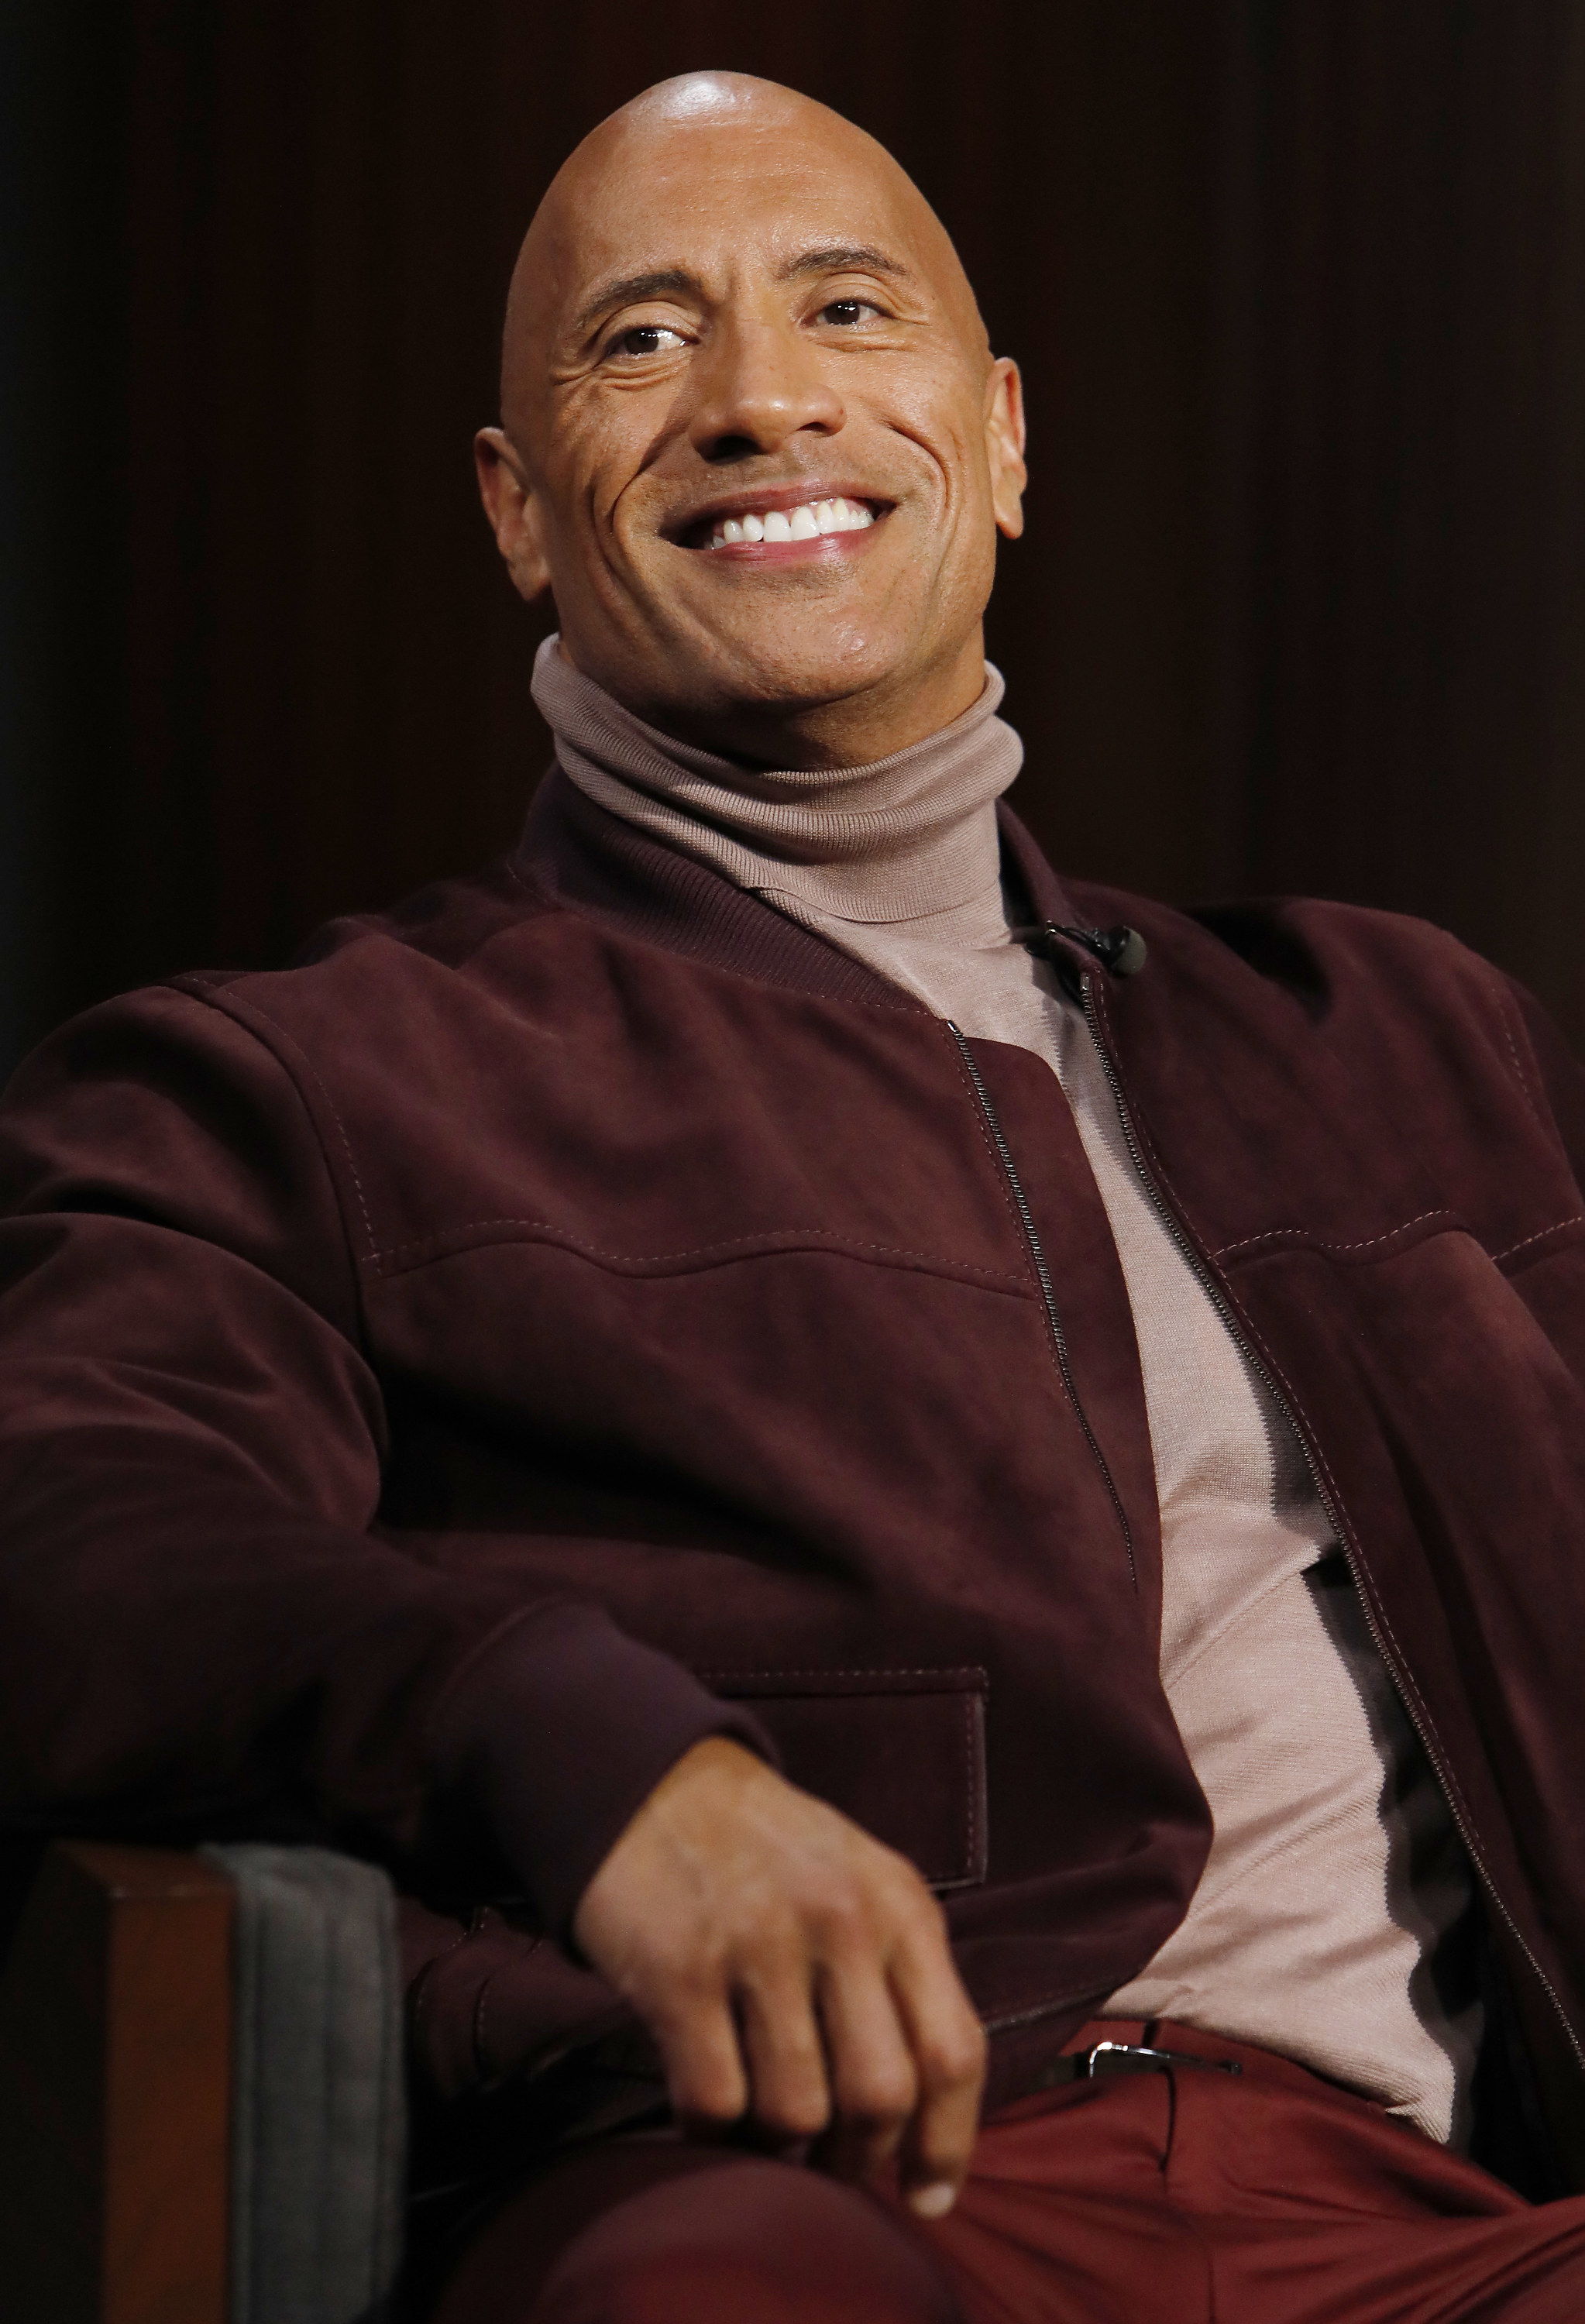 Dwayne Johnson seated and smiling